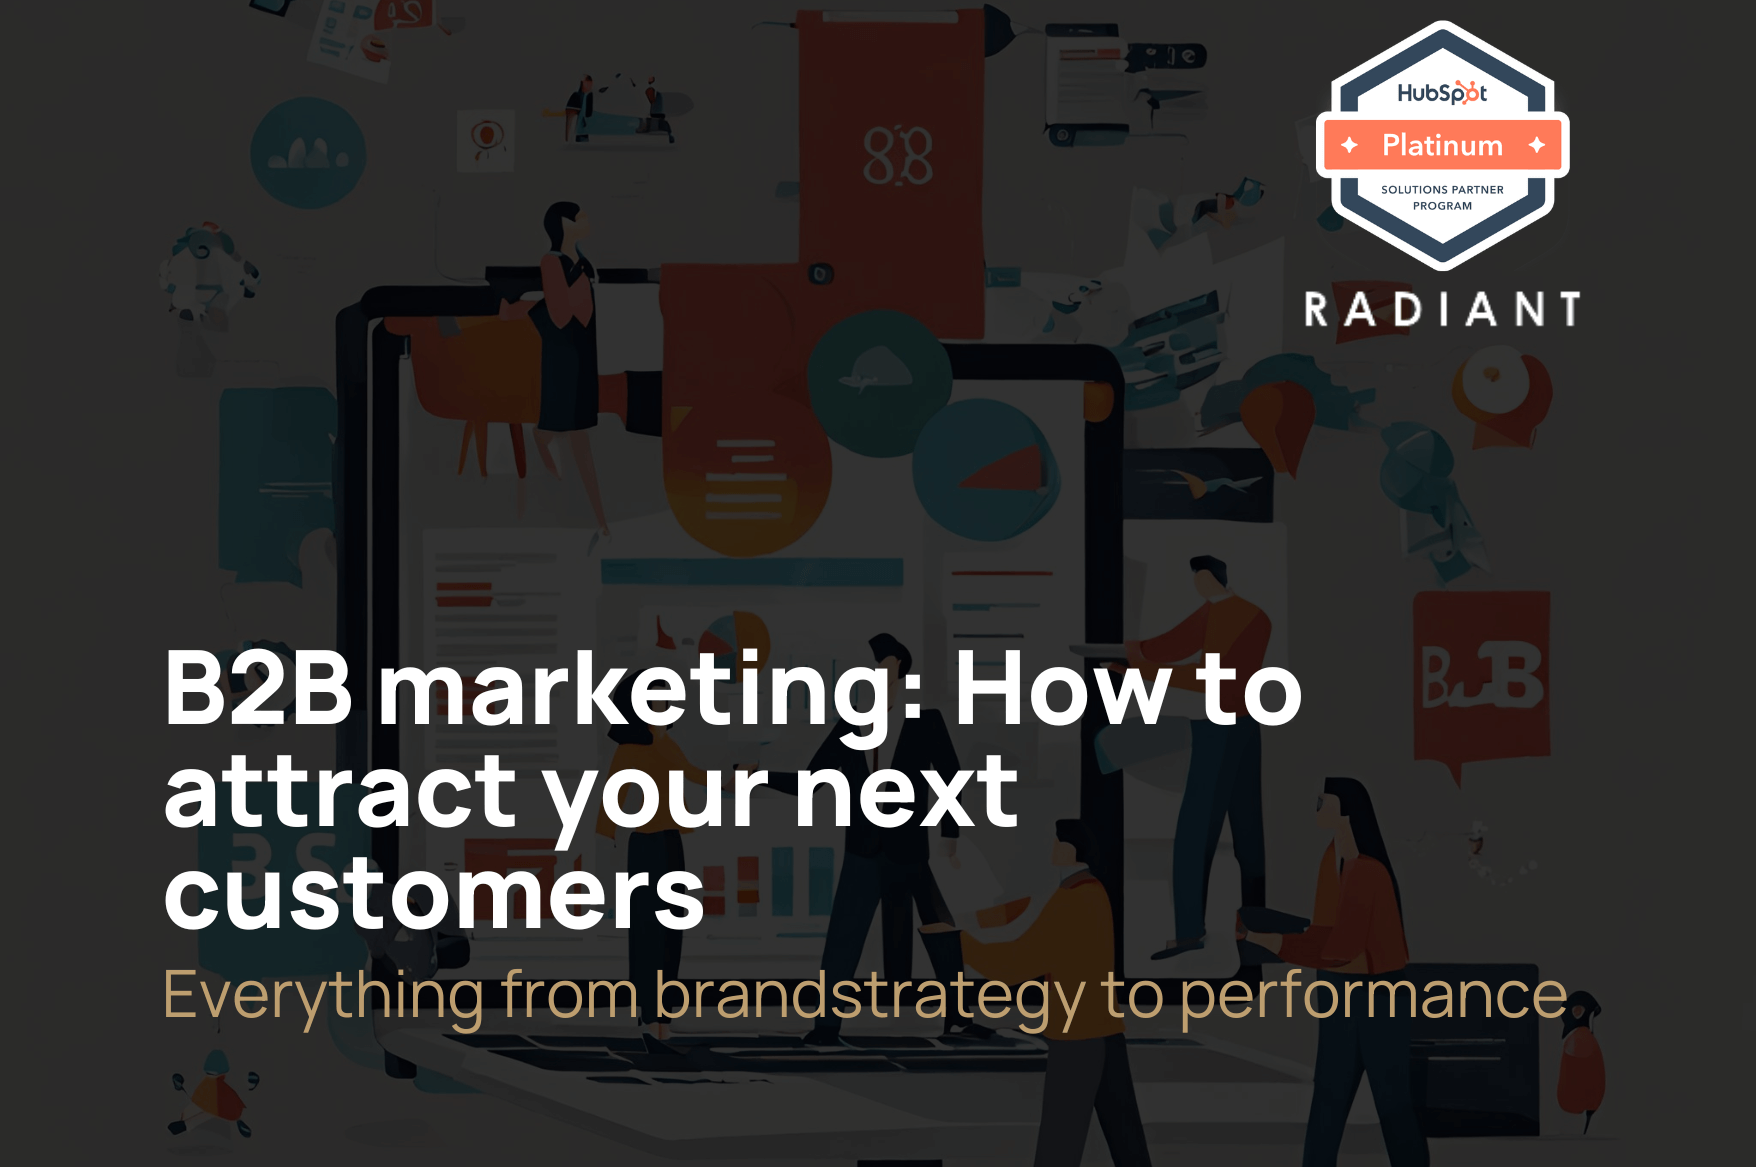 B2B marketing: How to attract your next customers